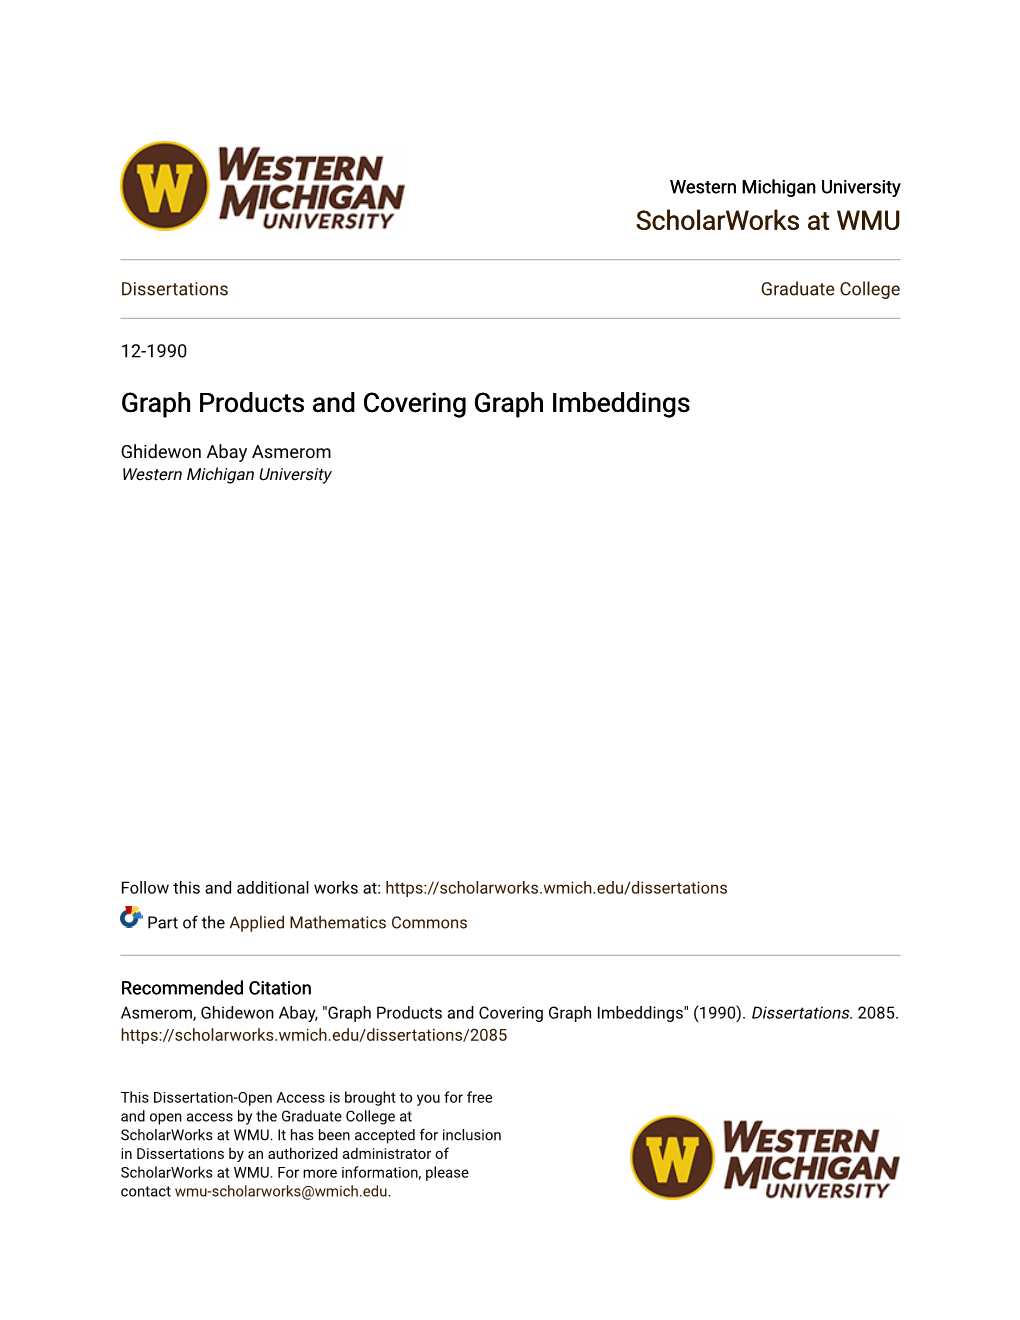 Graph Products and Covering Graph Imbeddings